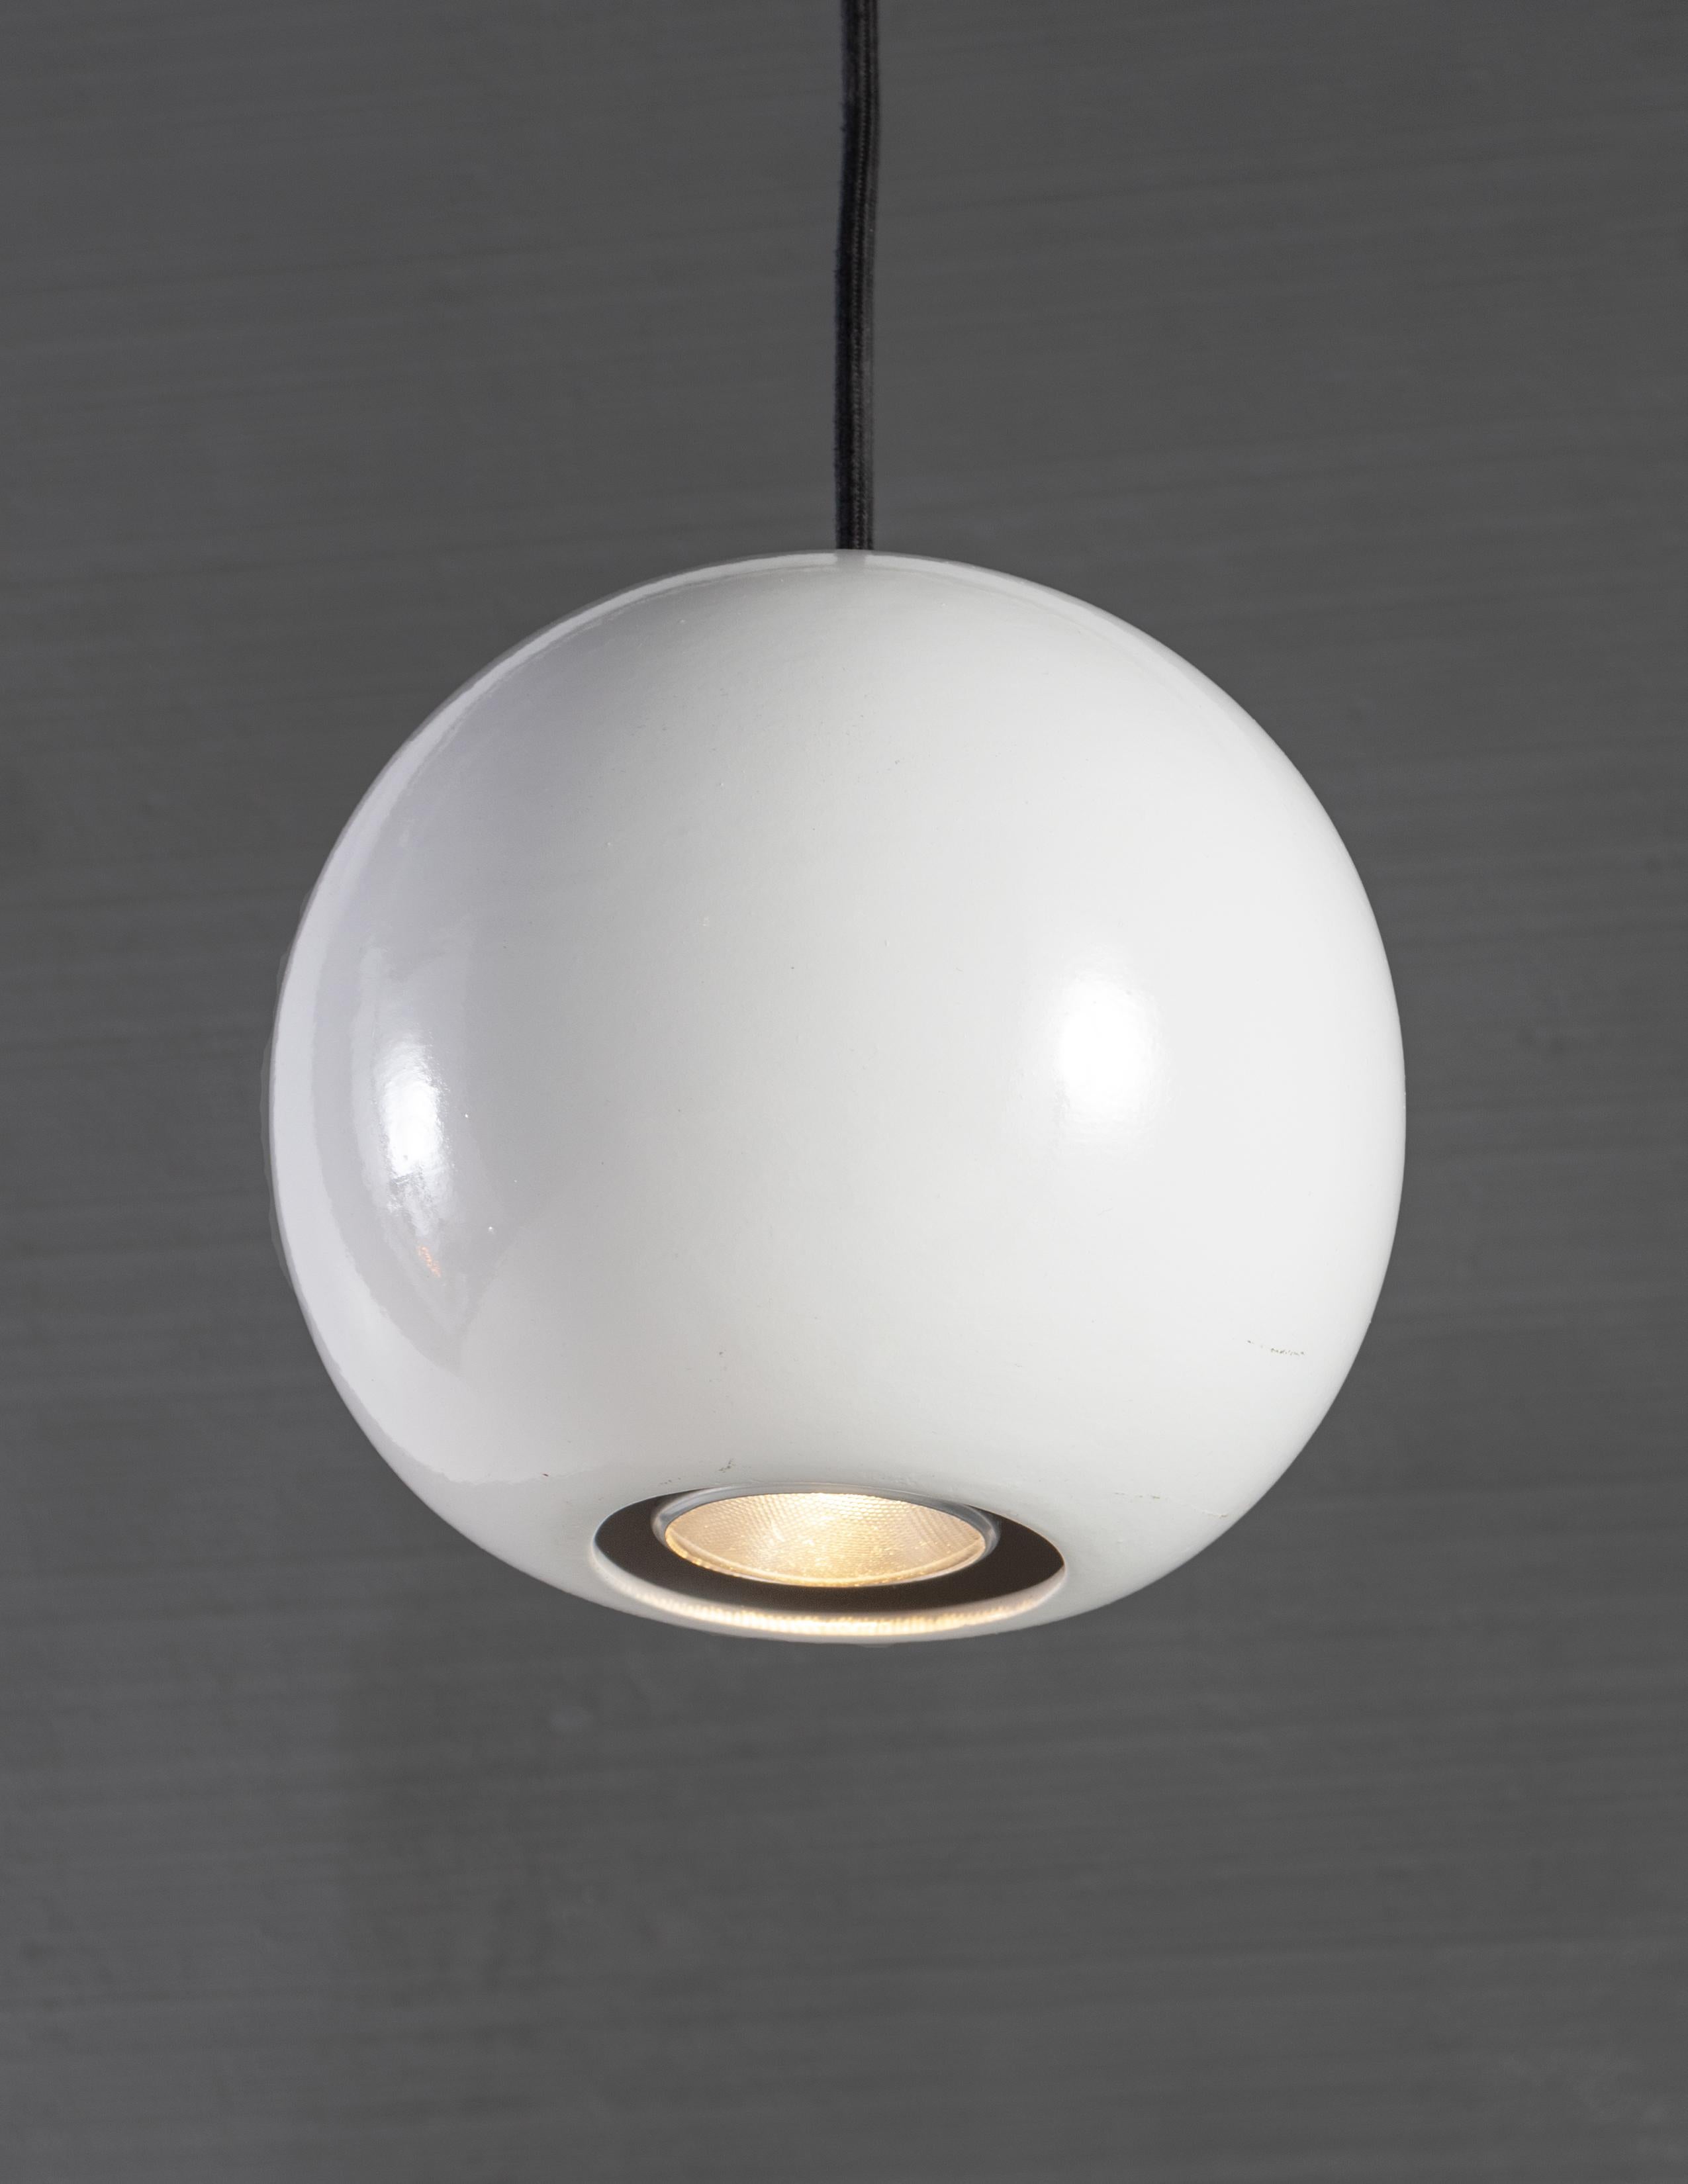 Ceramic ball form down light. Multiple colors, can be sold alone or as multiples. 

Custom canopy can be built in house.

Bulb 1 x LED only 7 watt parr 20. 5 lbs.

Handcrafted in Italy. Sold exclusively at Brendan Bass.

Measures: Minimum